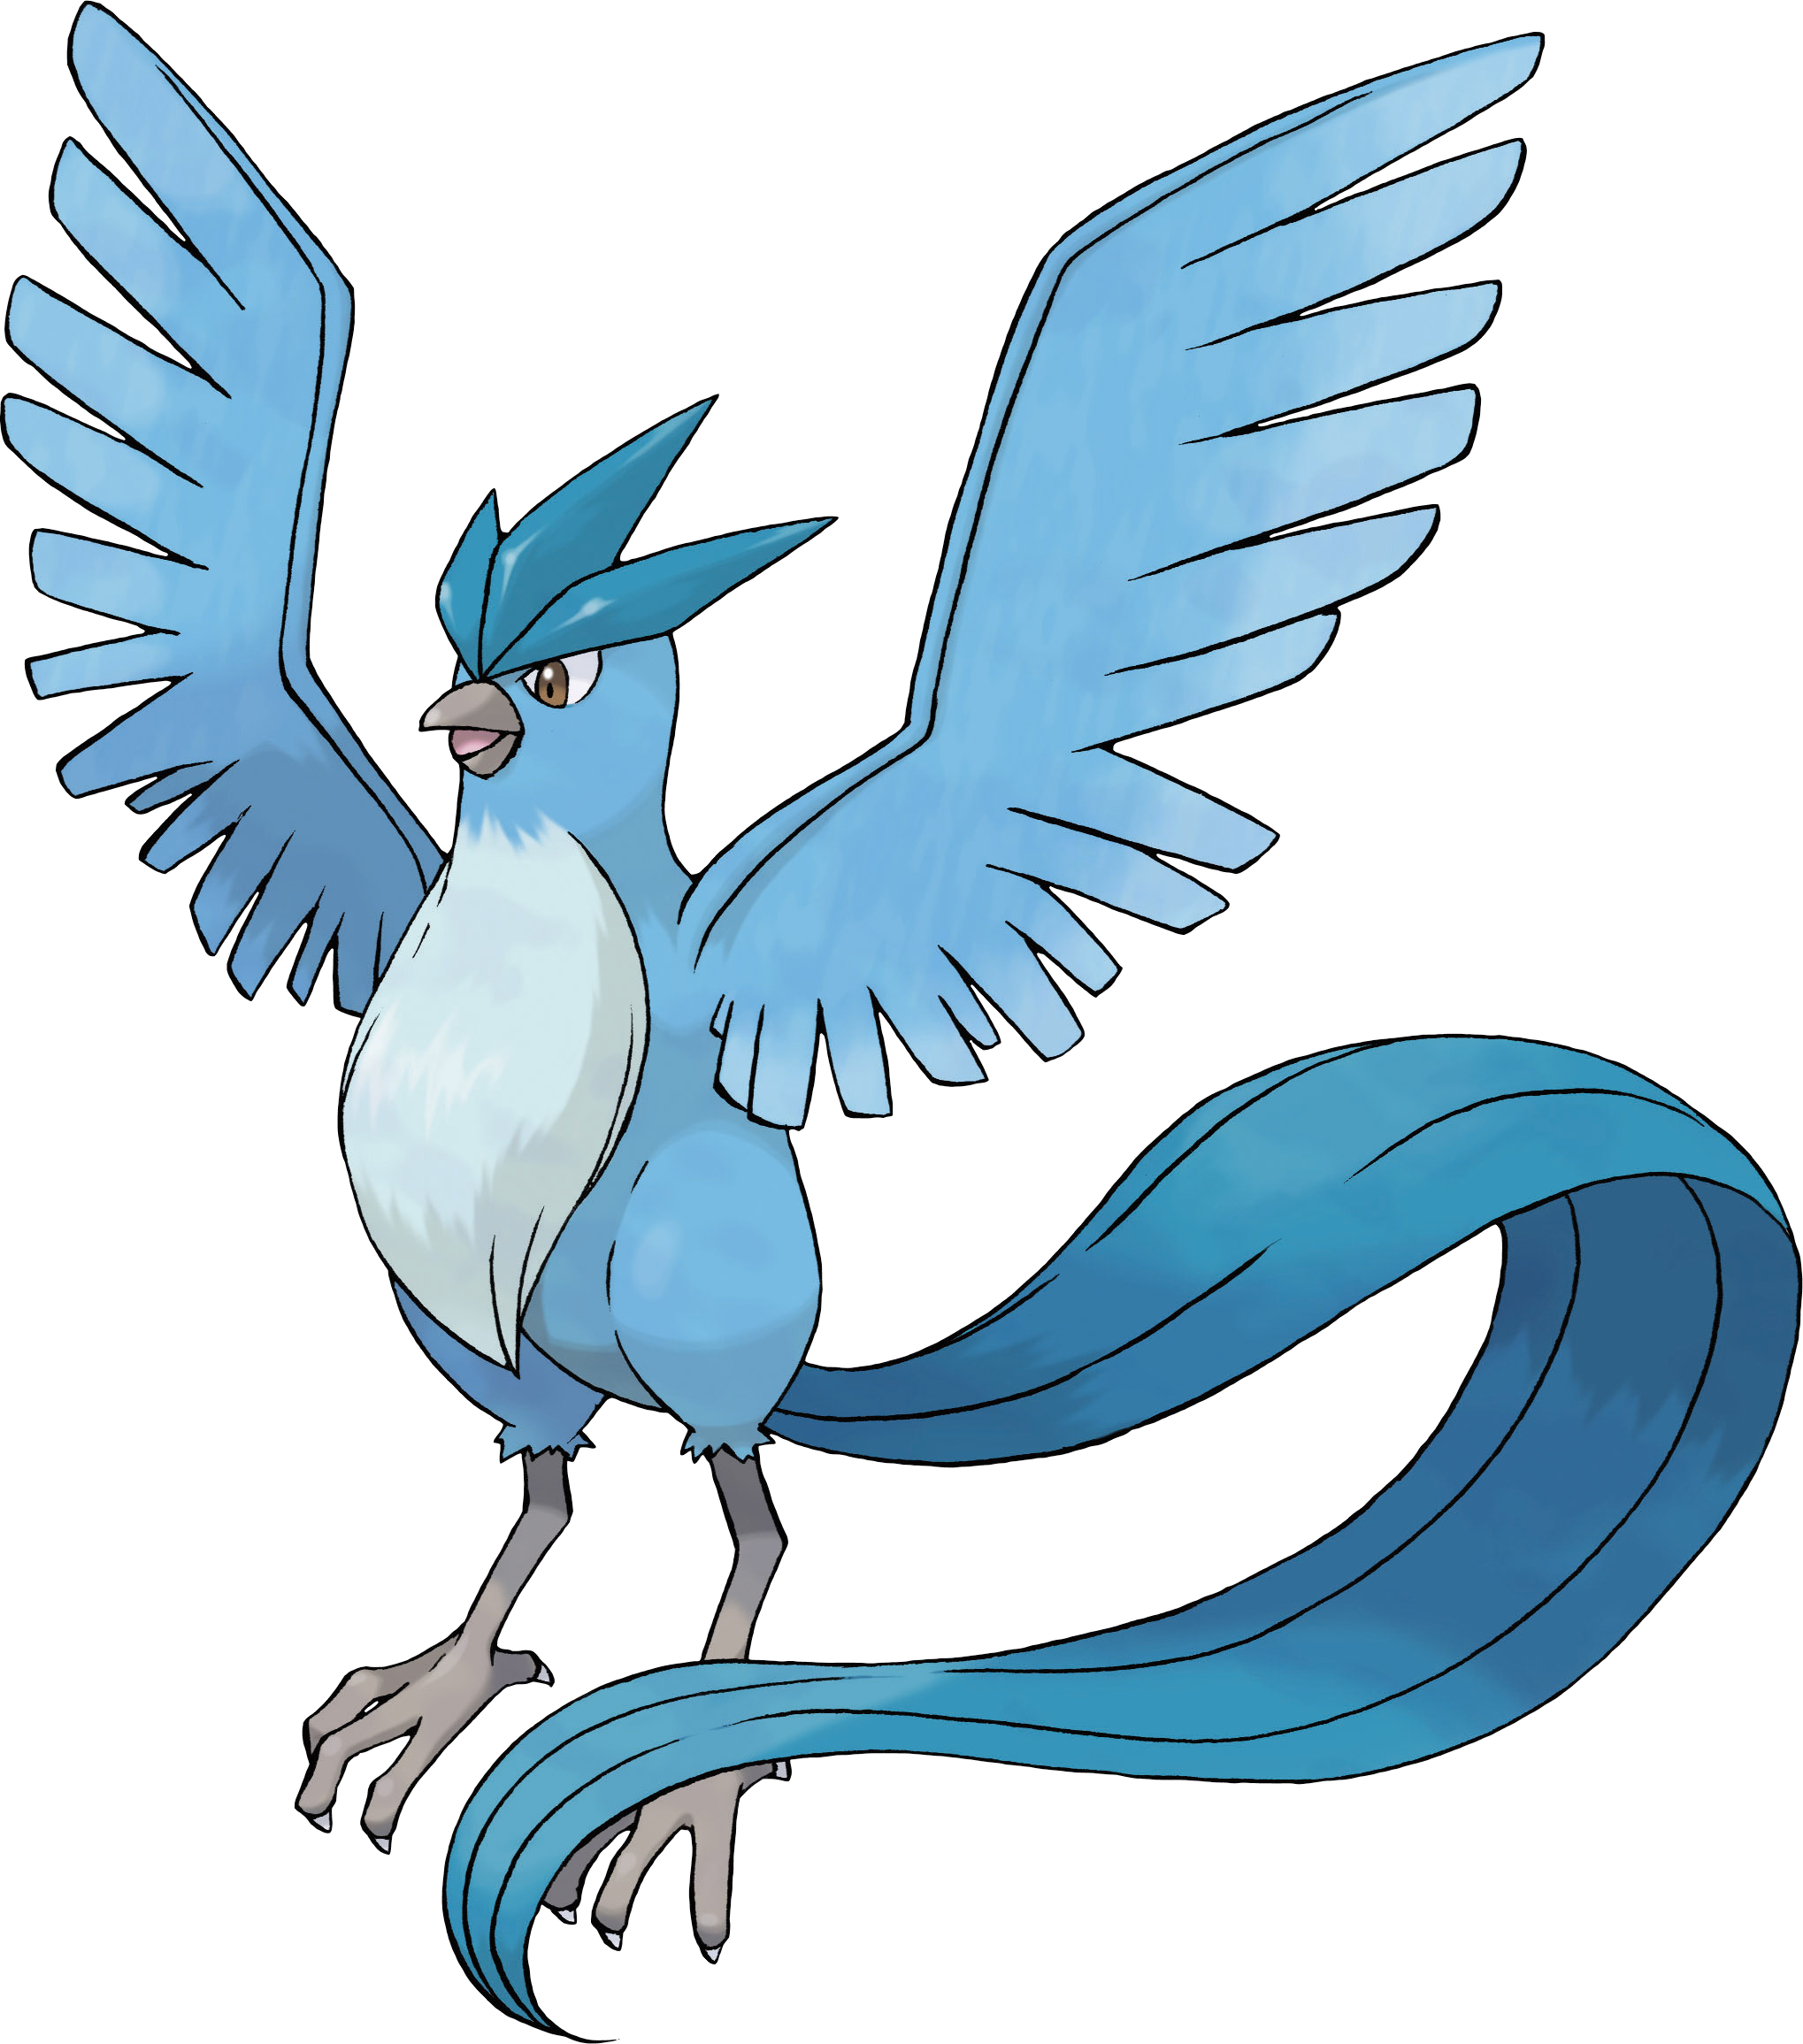 144Articuno.png